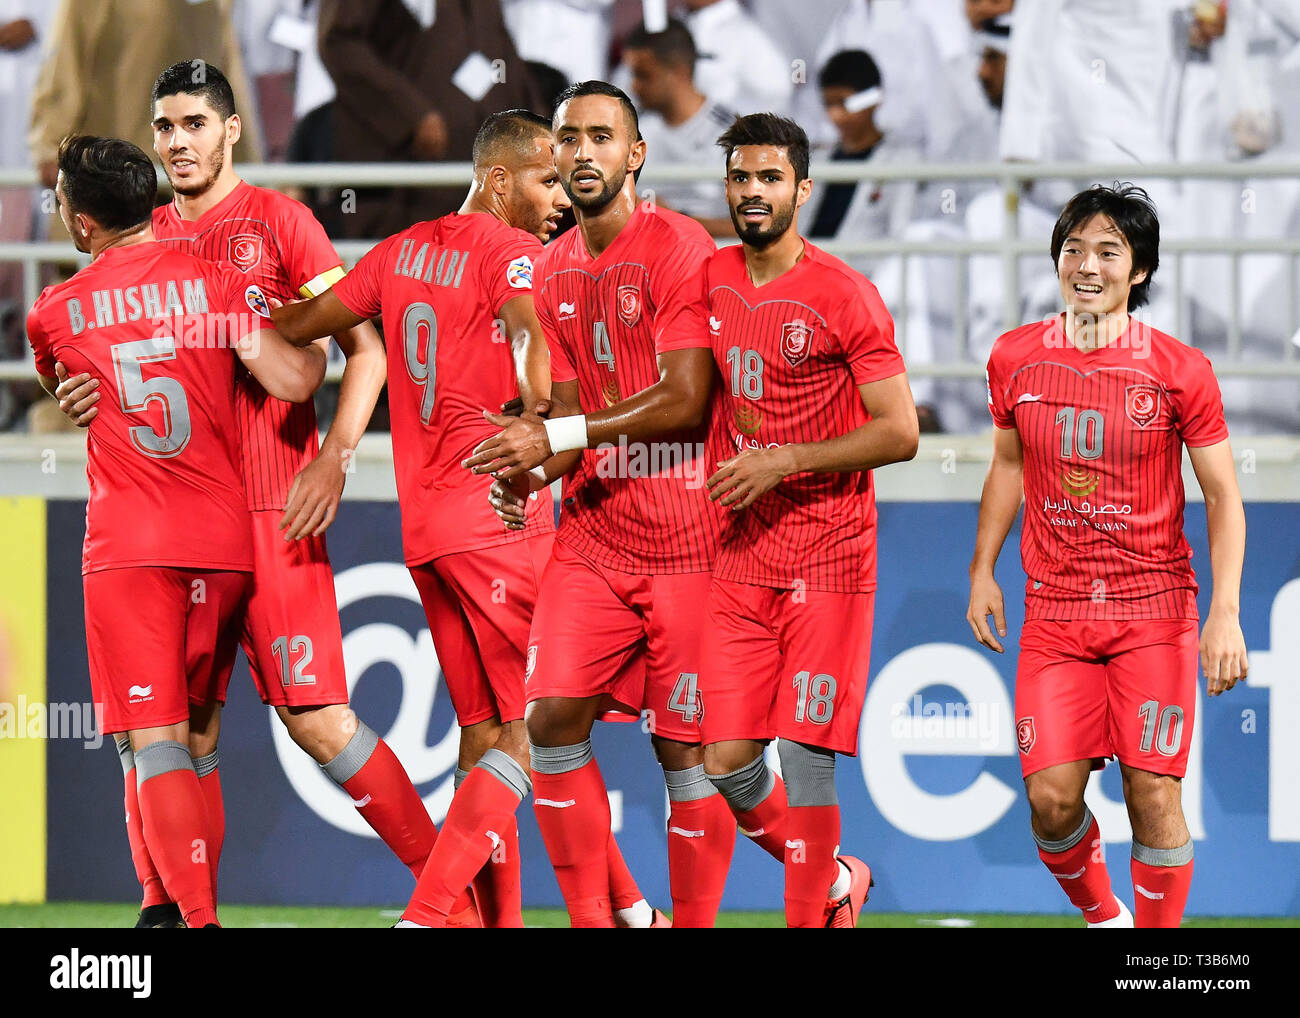 Doha, Capital of Qatar. 8th Apr, 2019. Karim Boudiaf (2nd L) of Al Duhail celebrates with his teammates after scoring the opening goal during the AFC Asian Champions League group C football match between Qatar's Al Duhail SC and UAE's Al Ain FC at Abdullah bin Khalifa Stadium in Doha, Capital of Qatar, April 8, 2019. The match ended in a 2-2 draw. Credit: Nikku/Xinhua/Alamy Live News Stock Photo